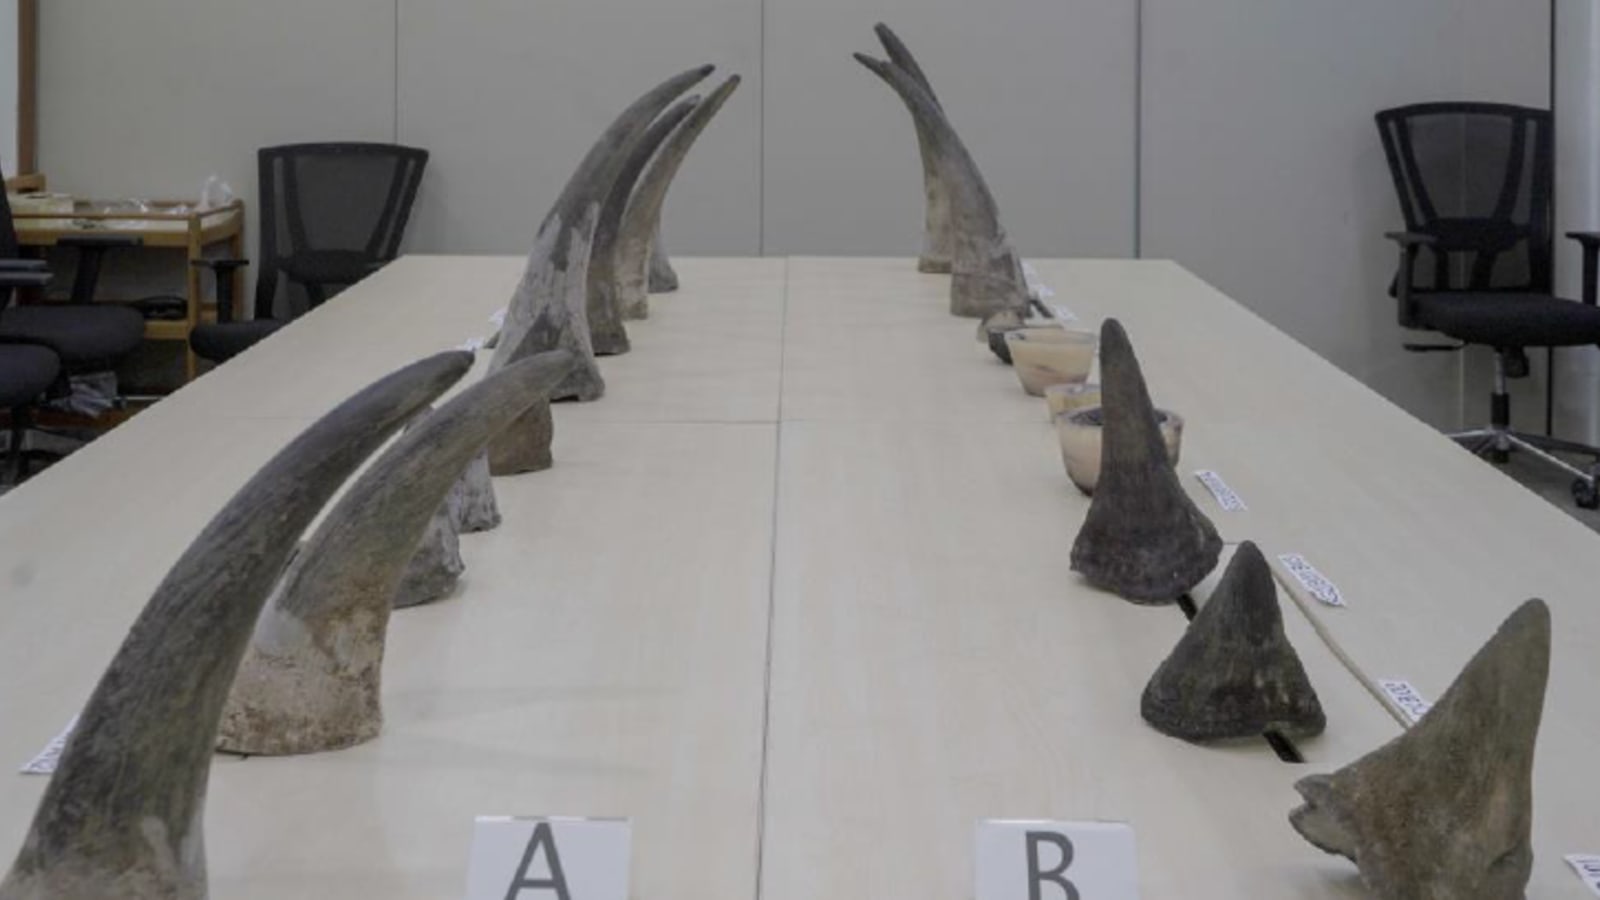 Rhinoceros horns worth S$1.2 million seized at Changi Airport, largest such haul in Singapore